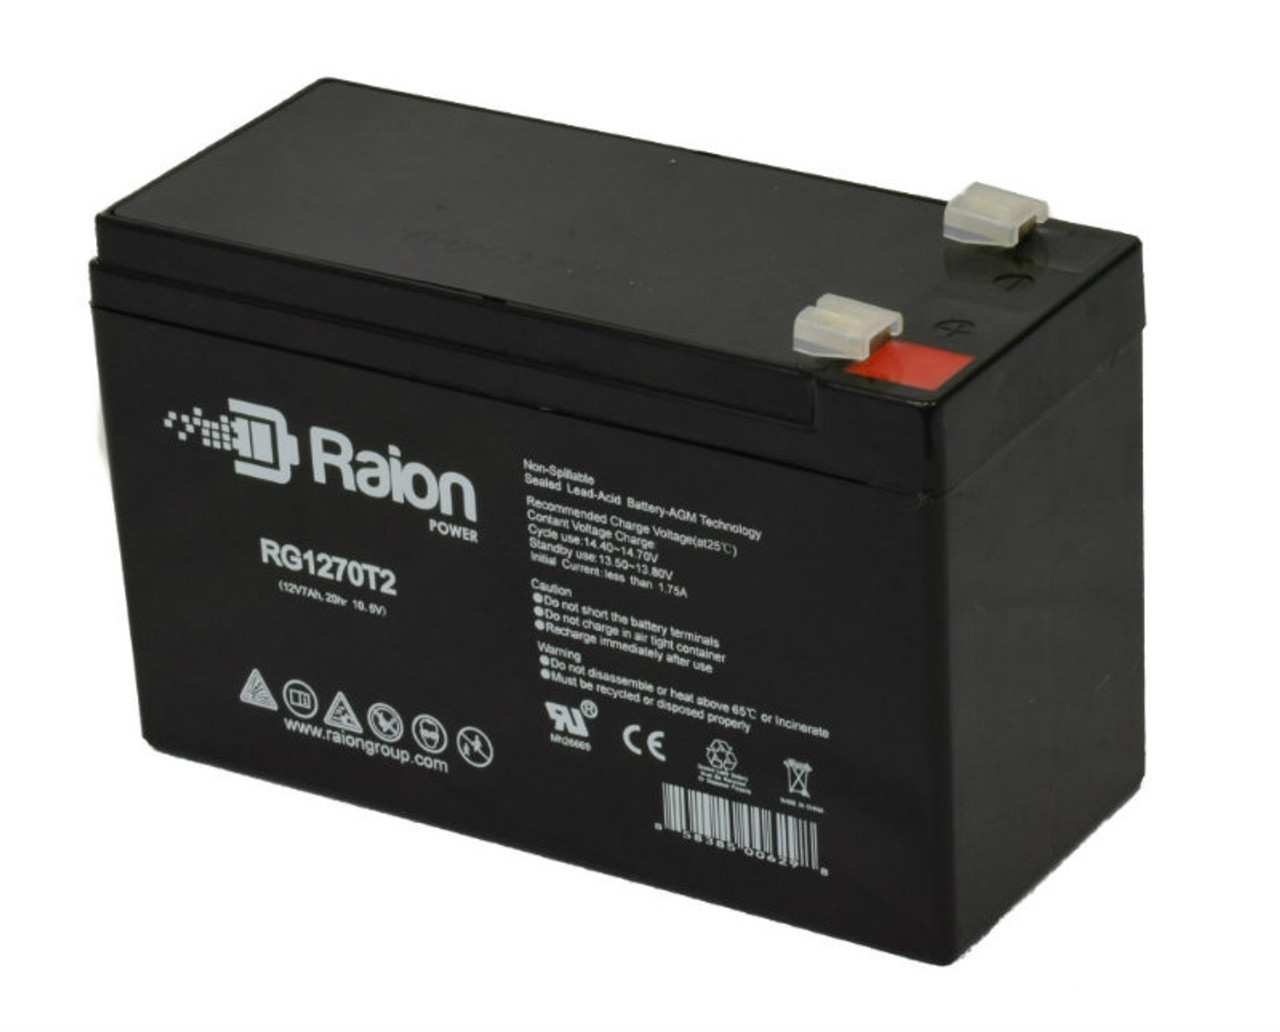 Raion Power Replacement 12V 7Ah RG1270T1 Fire Alarm Battery for Altronix AL176ULX